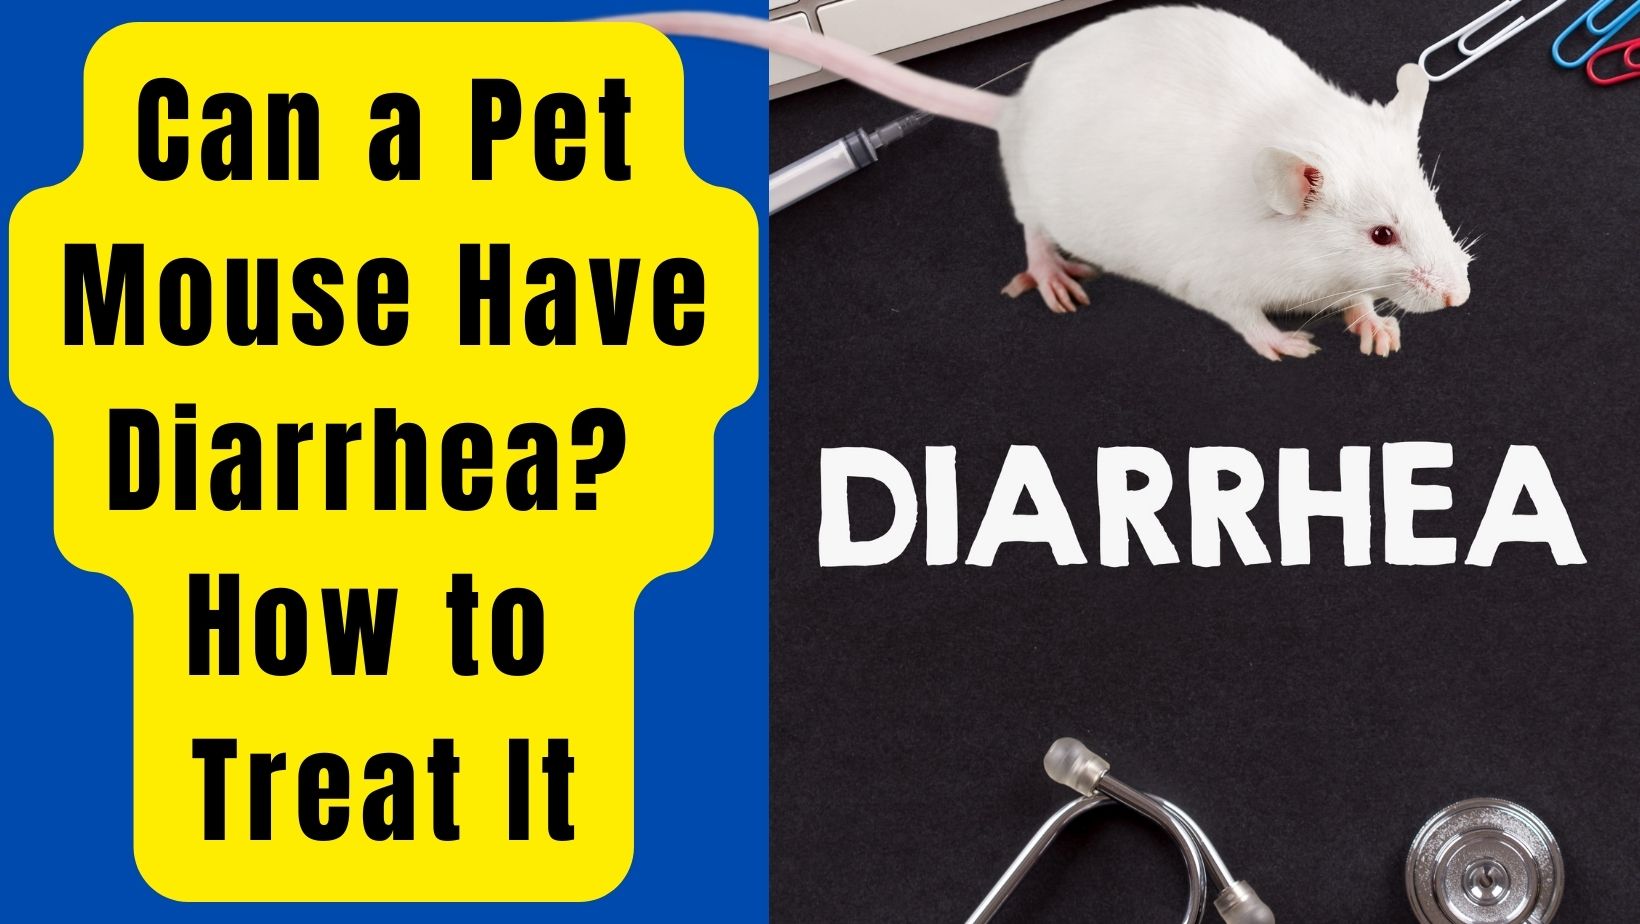 Can a Pet Mouse Have Diarrhea? 5 Ways To Treat It